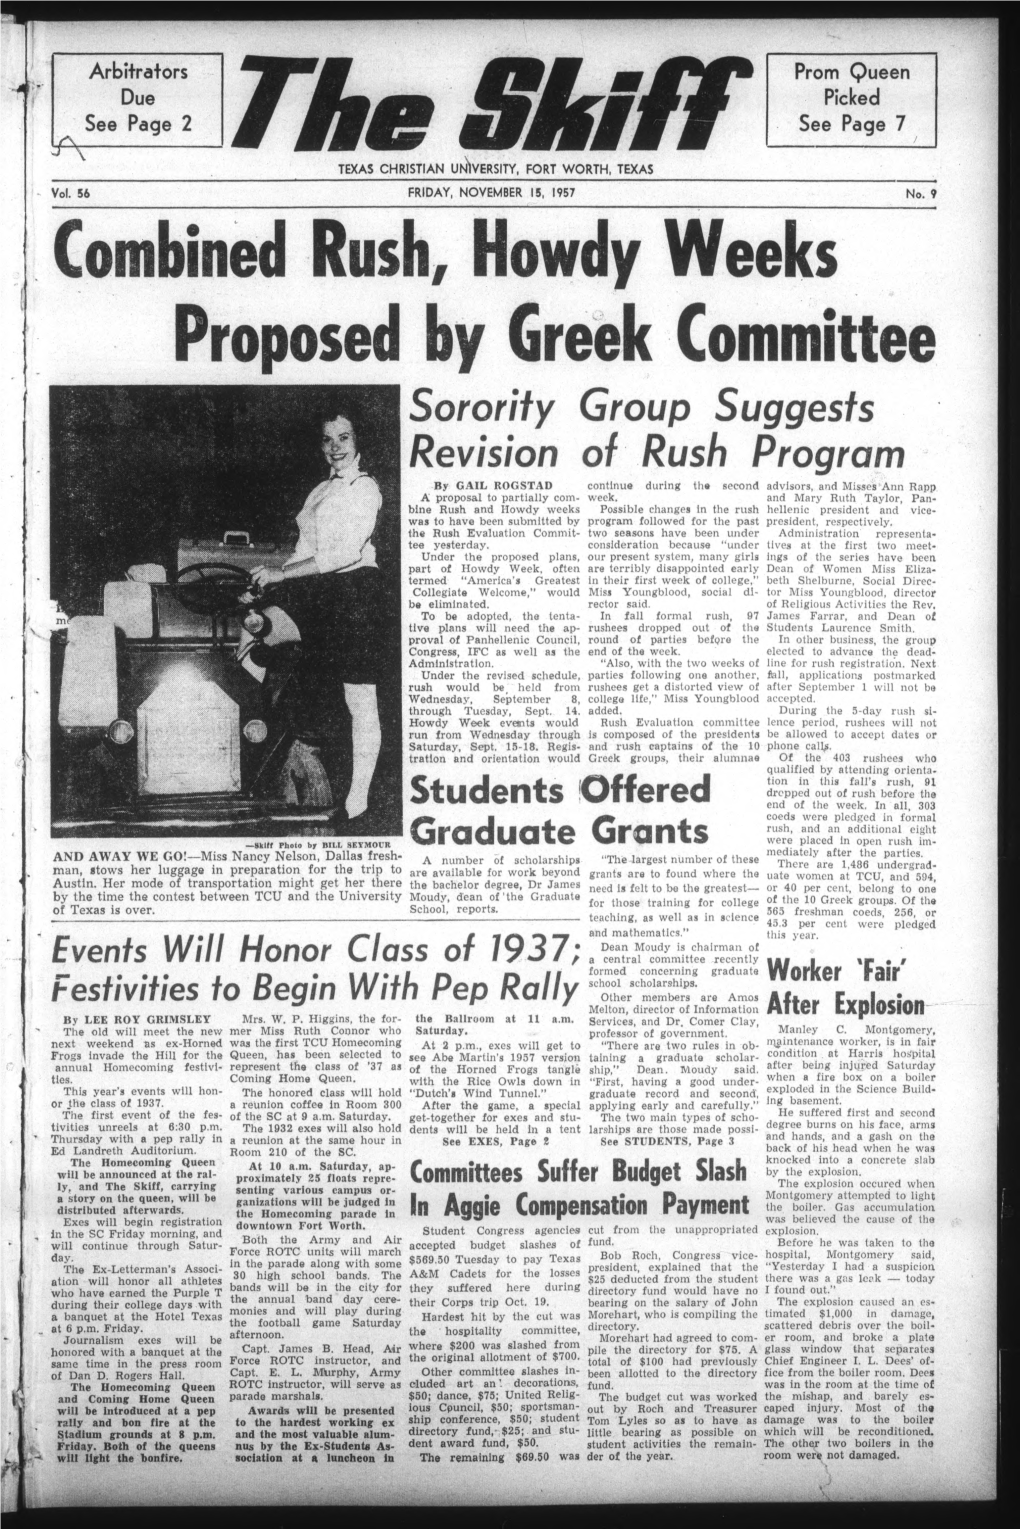 Combined Rush, Howdy Weeks Proposed by Greek Committee